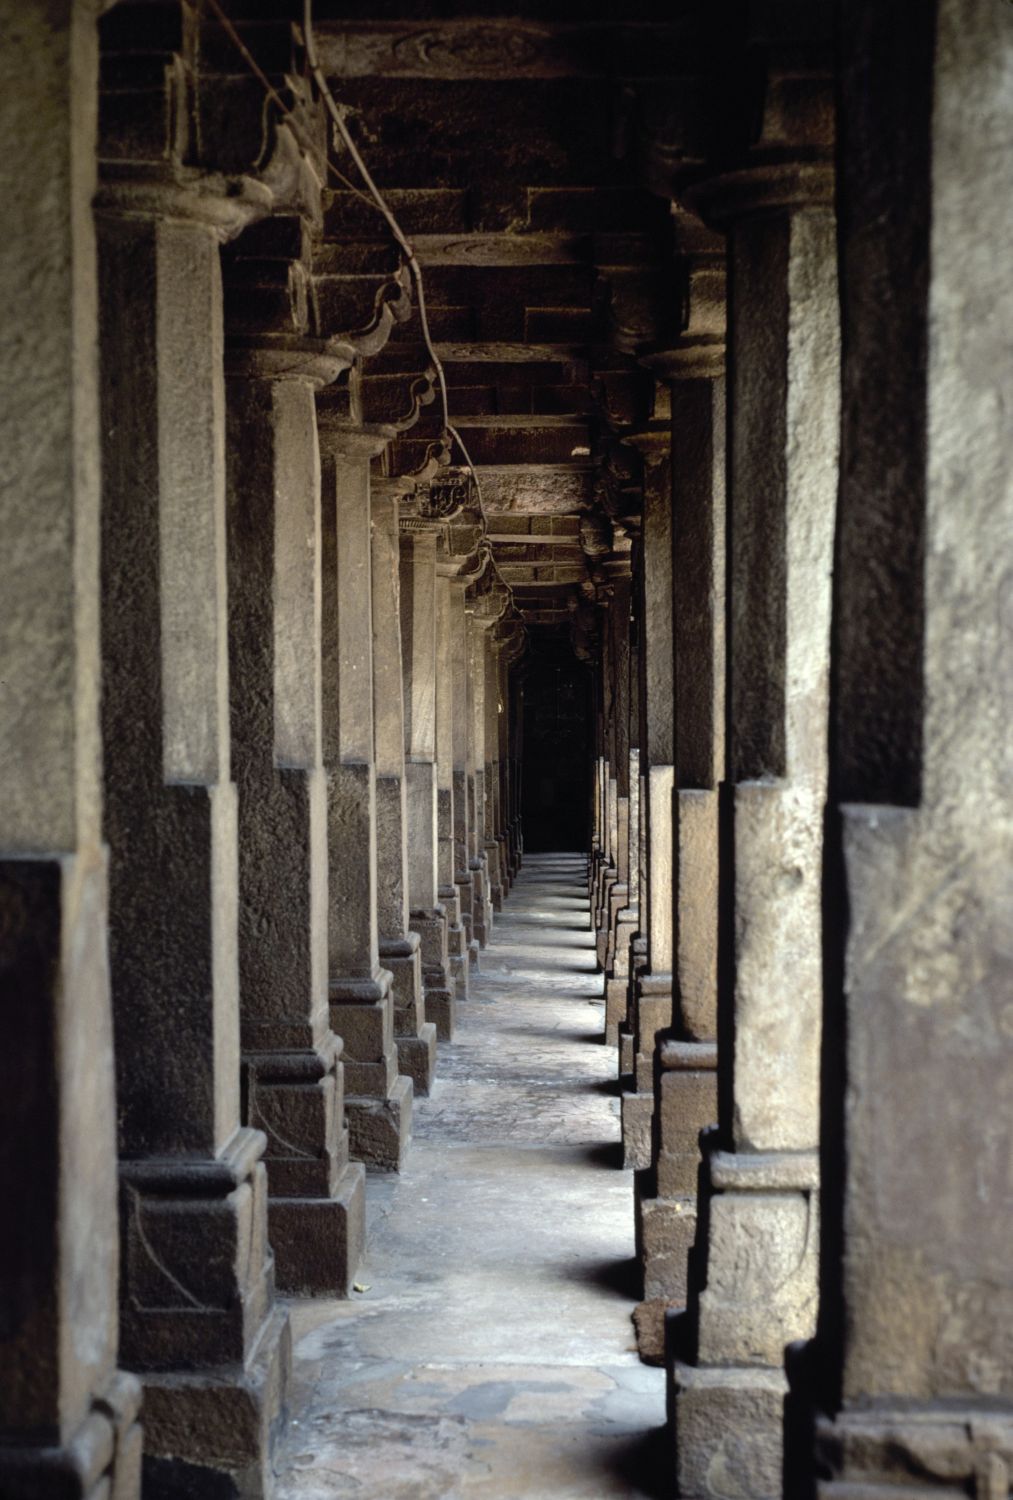 View along aisle in prayer hall.